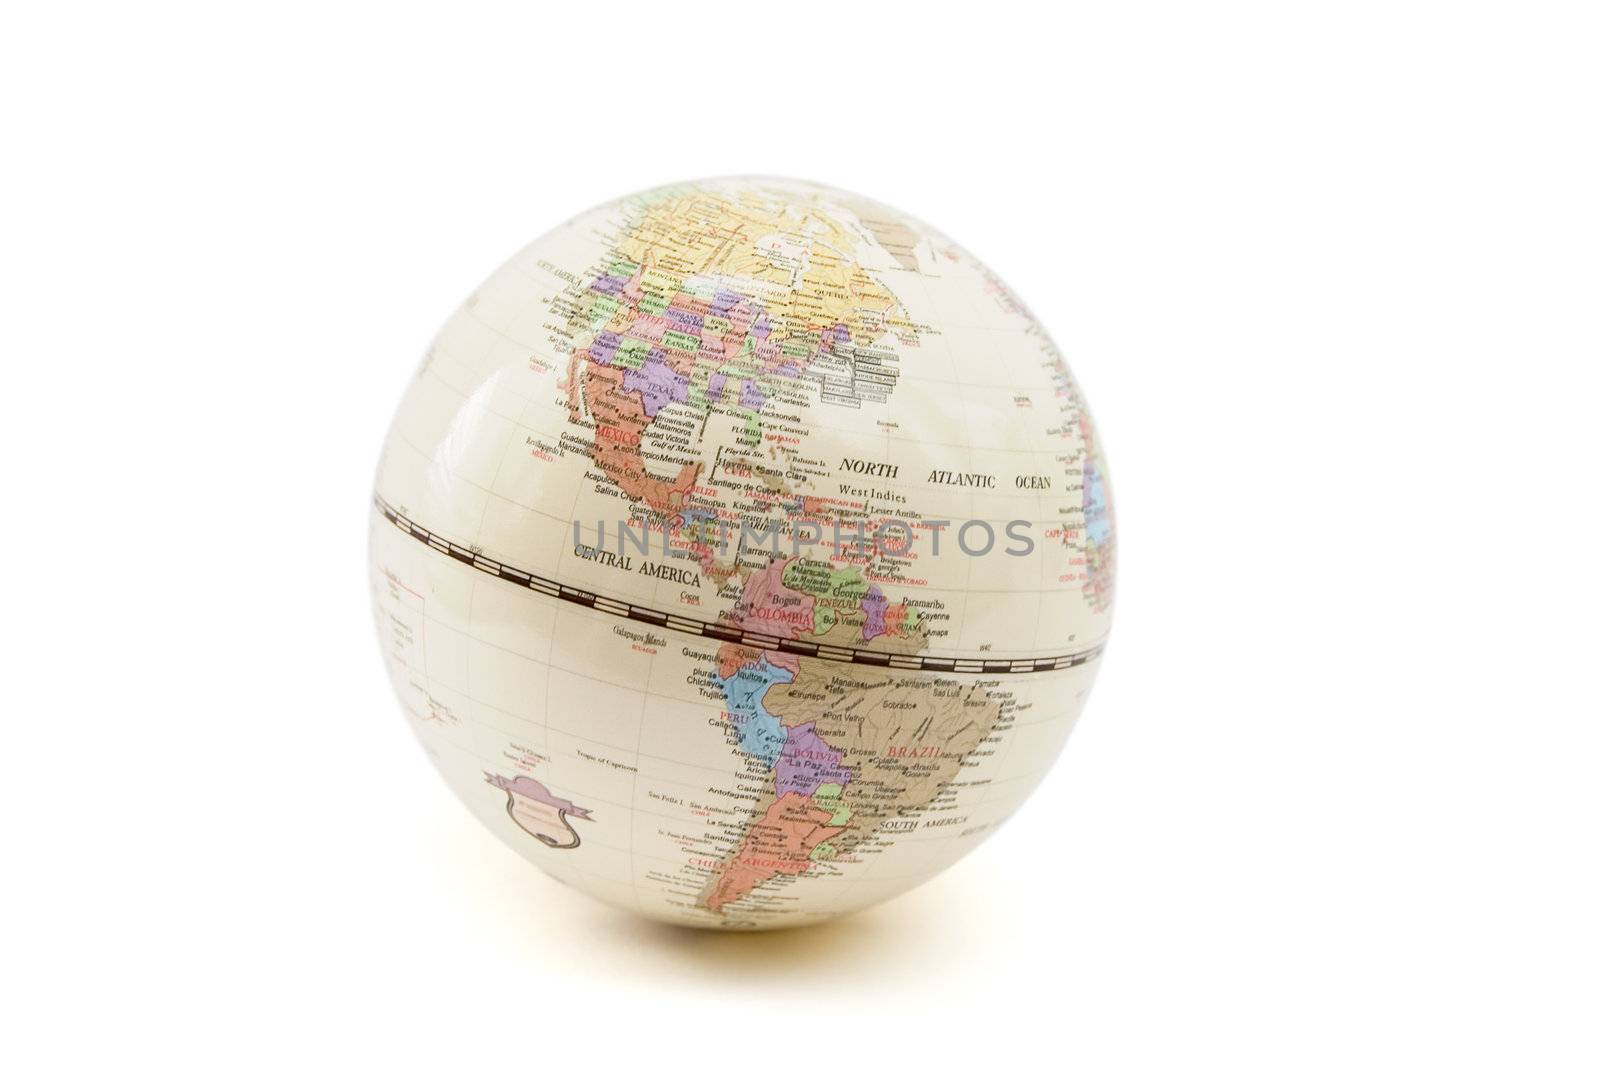 globe with the image of north and south americas by Serp